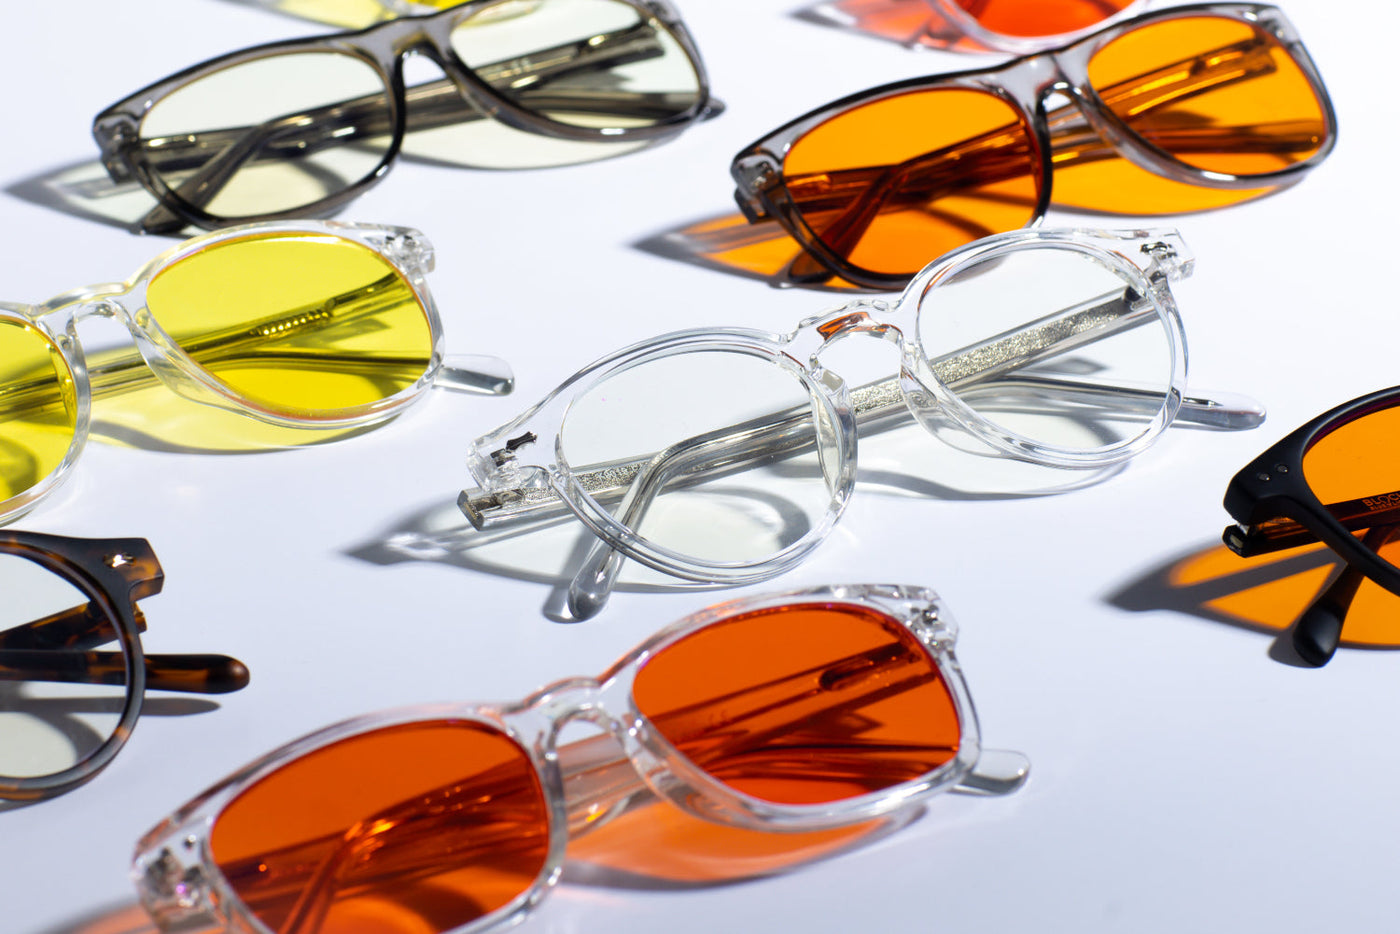 Ultimate Buyer's Guide - Lens Color for Sports Sunglasses